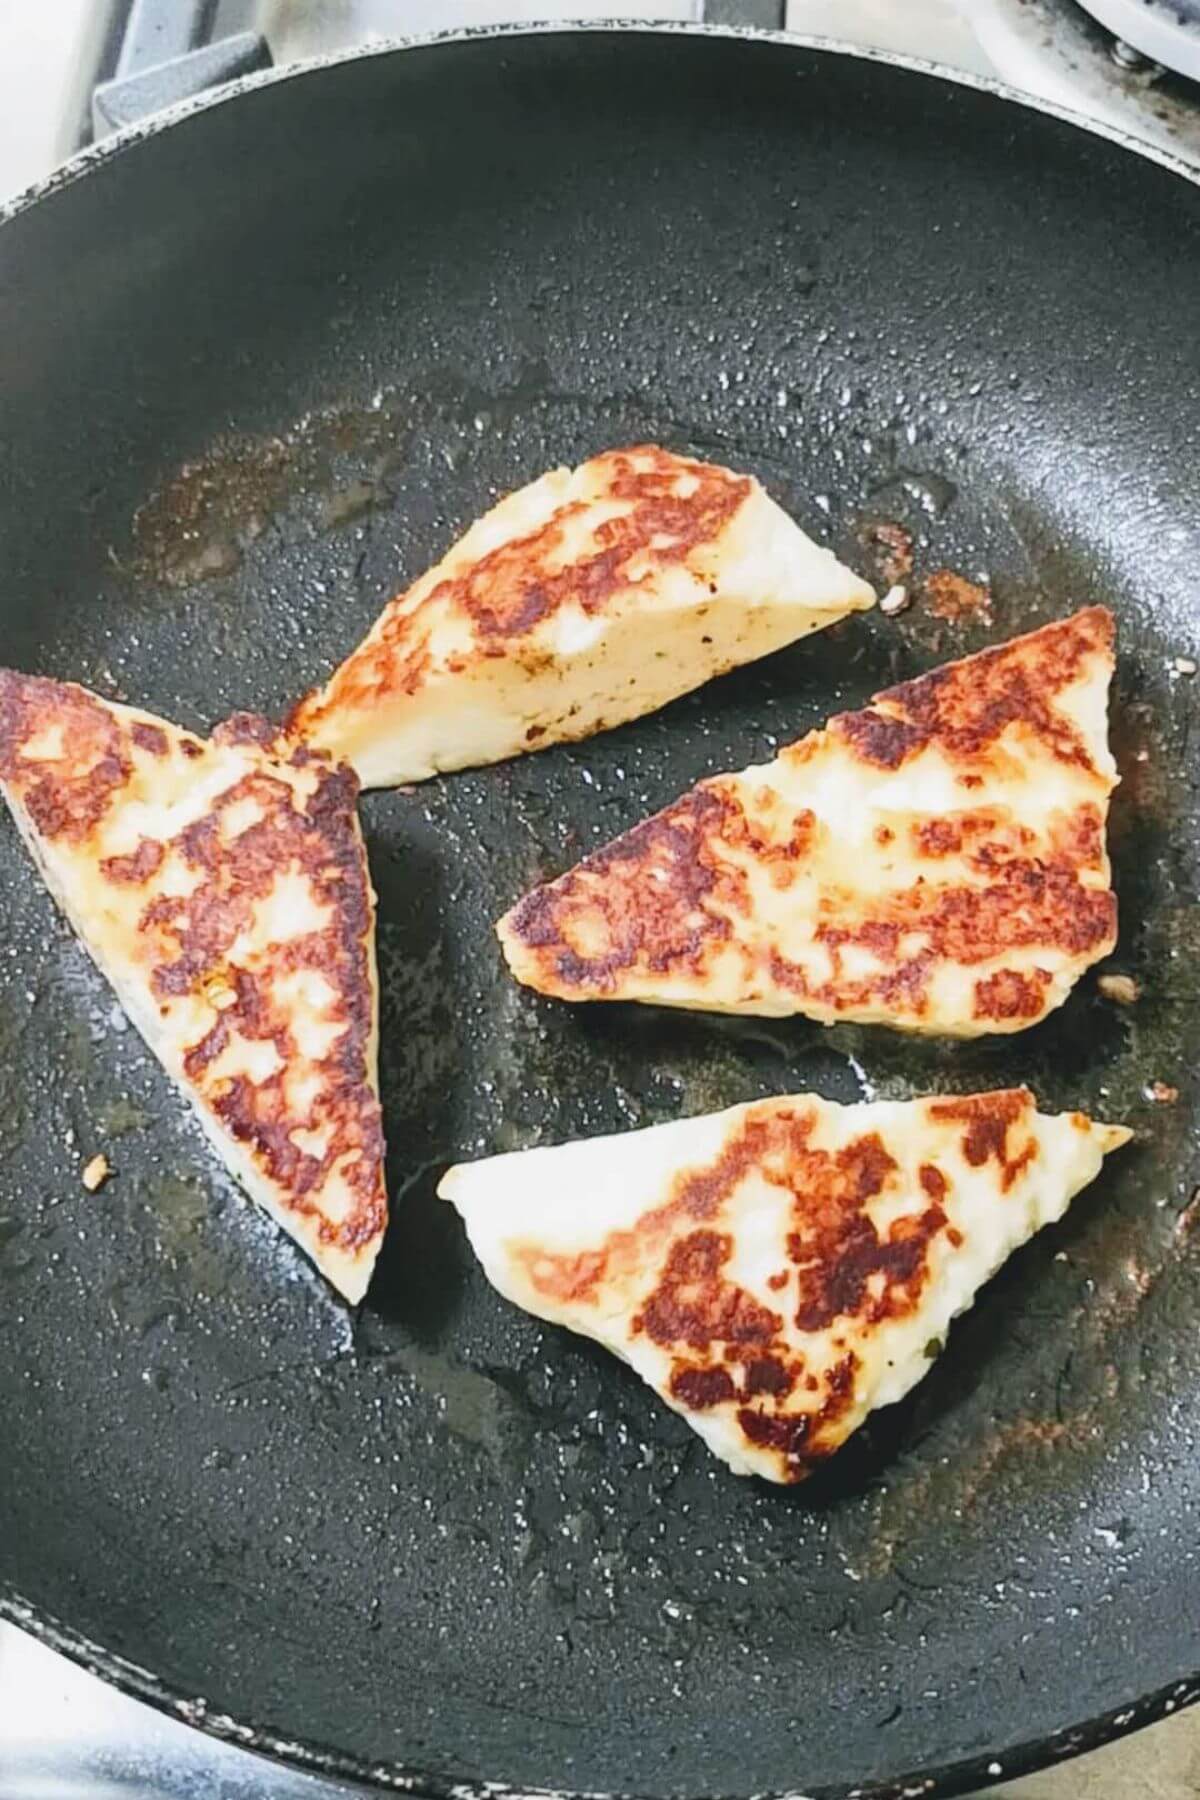 Four halloumi triangles frying in the pan